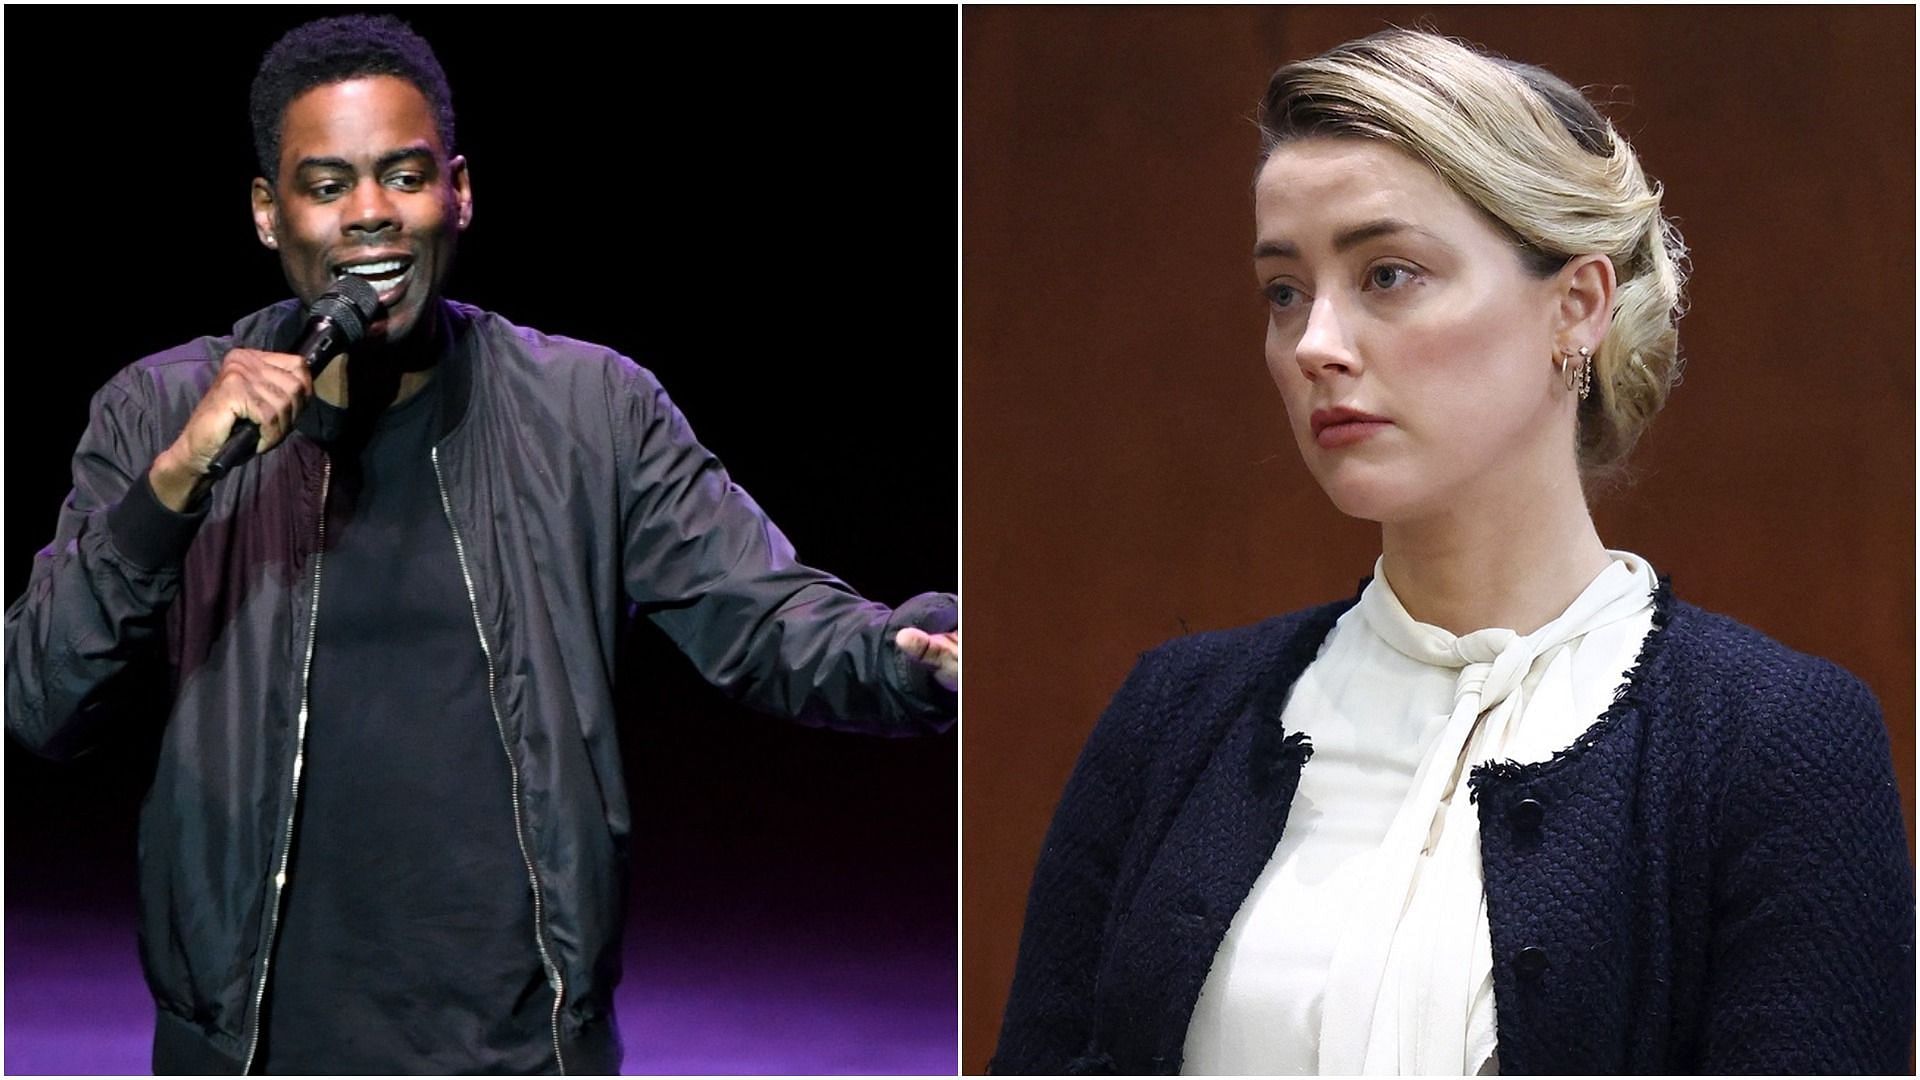 Chris Rock and Amber Heard (Image via Ethan Miller/Getty Images, and Jim Lo Scalzo/Pool/AFP/Getty Images)